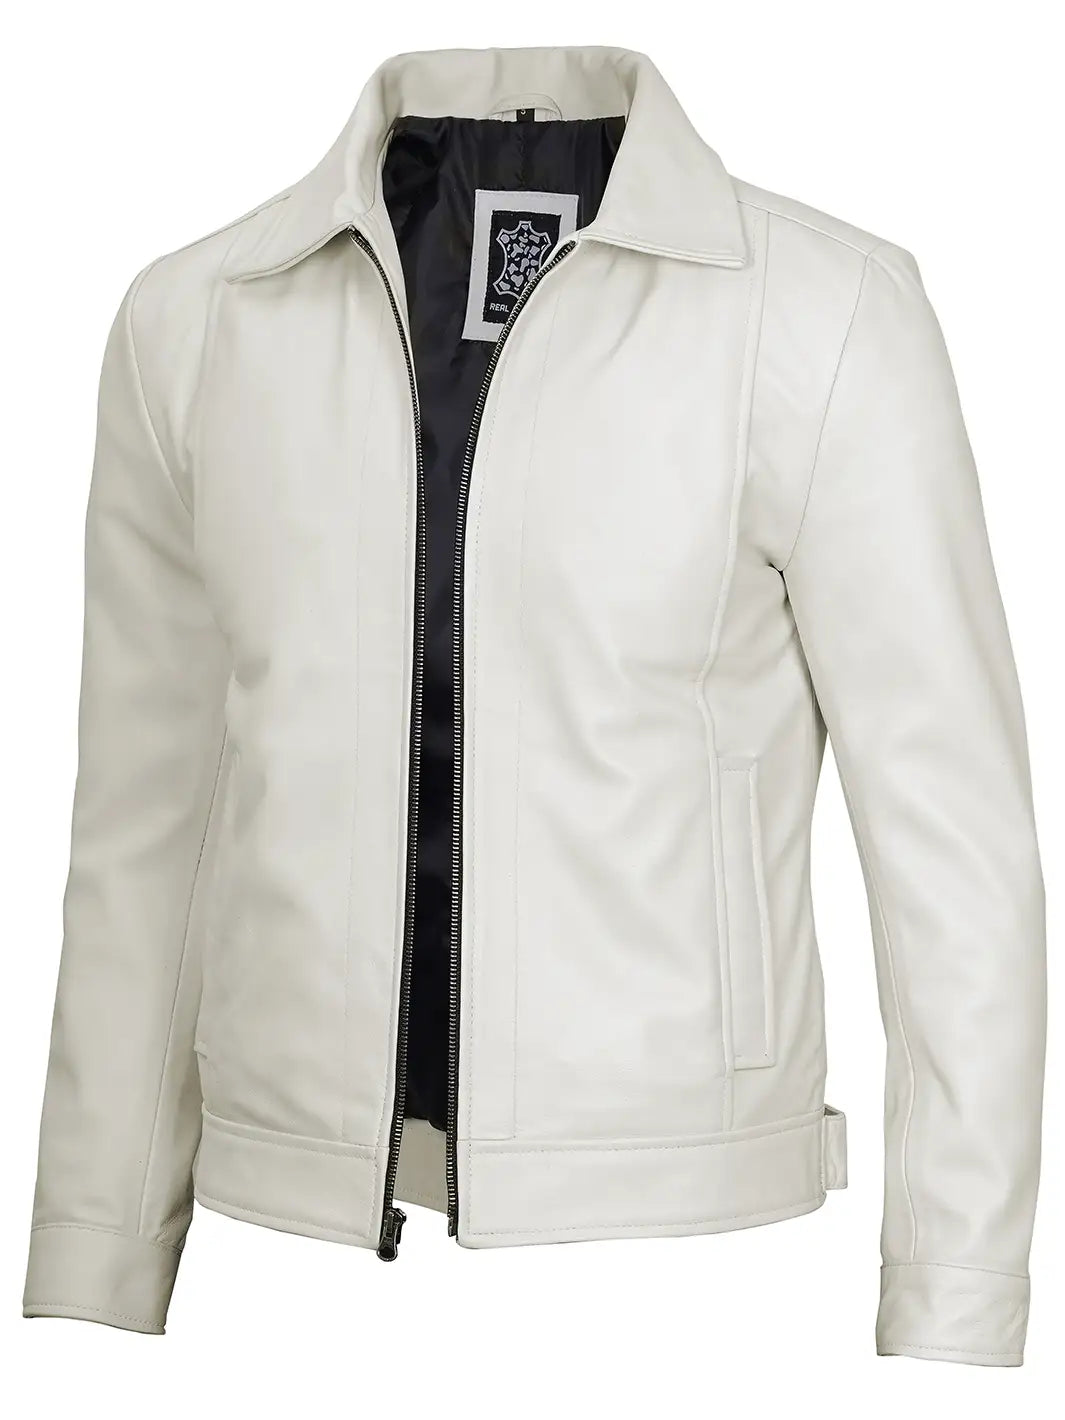 Mens real leather off white jacket